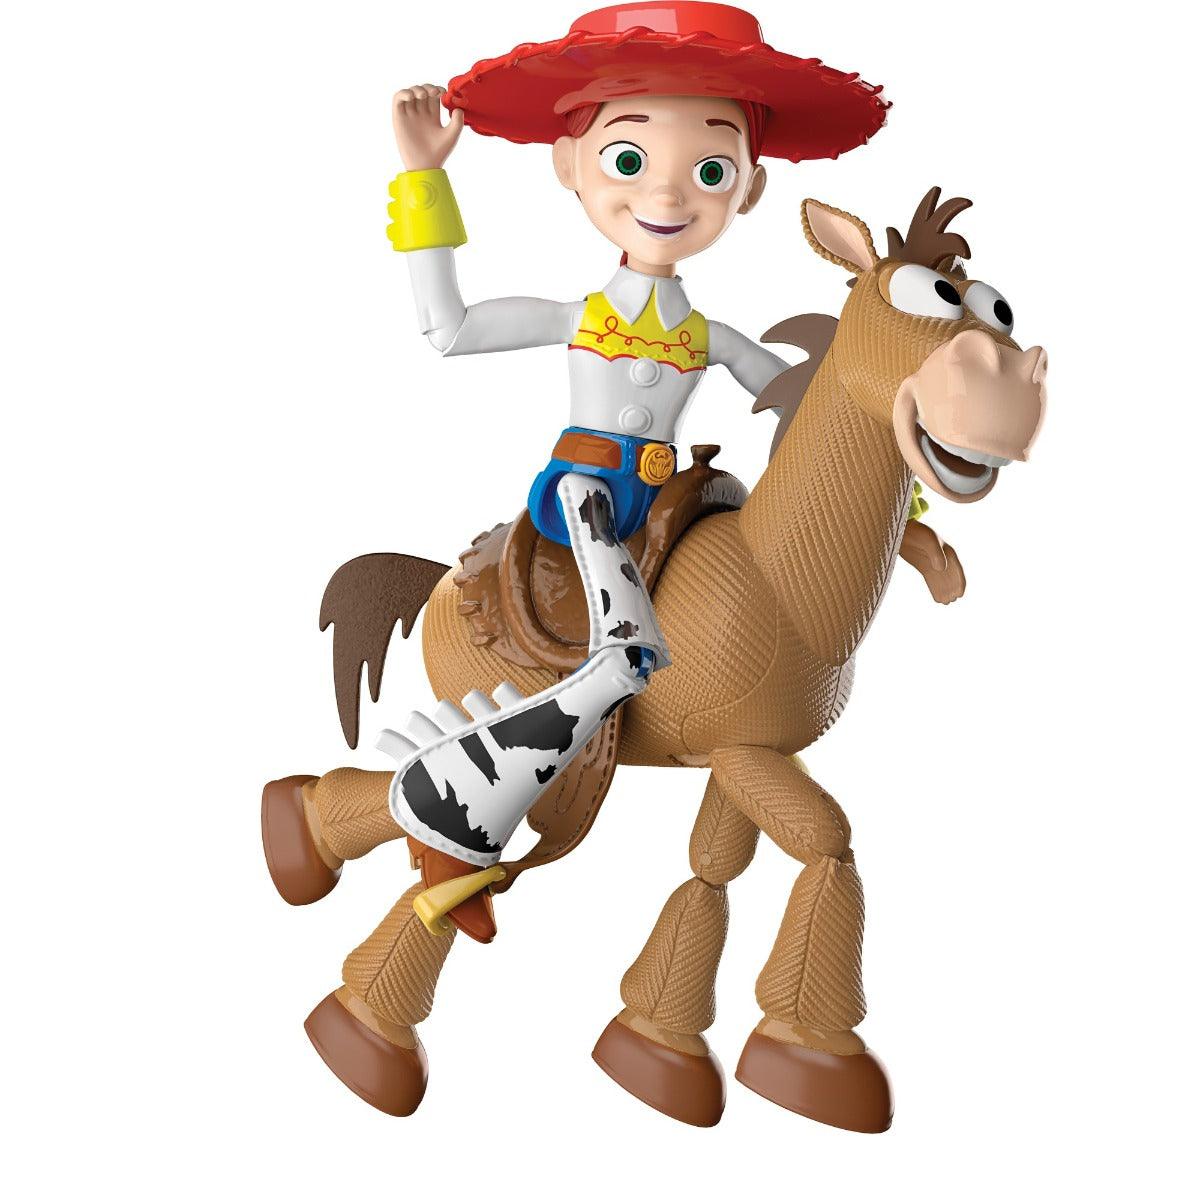 Toy Story Adventure Character Figures - Jessie & Bullseye (Pack Of 2)